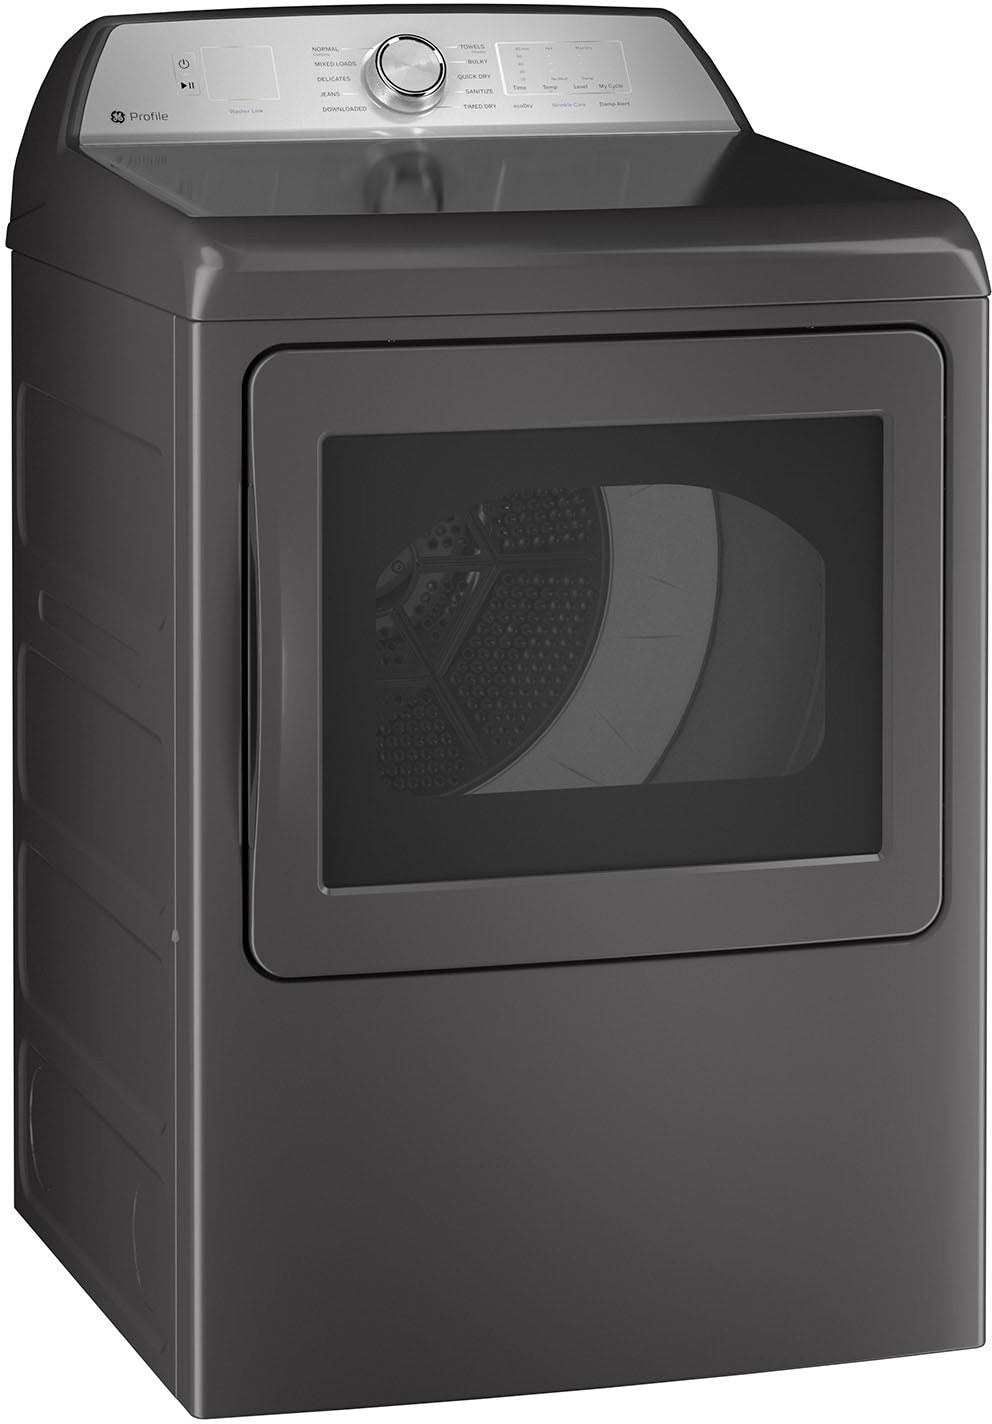 GE Profile - 7.4 Cu. Ft. Smart Electric Dryer with Sanitize Cycle and Sensor Dry - Diamond gray_1